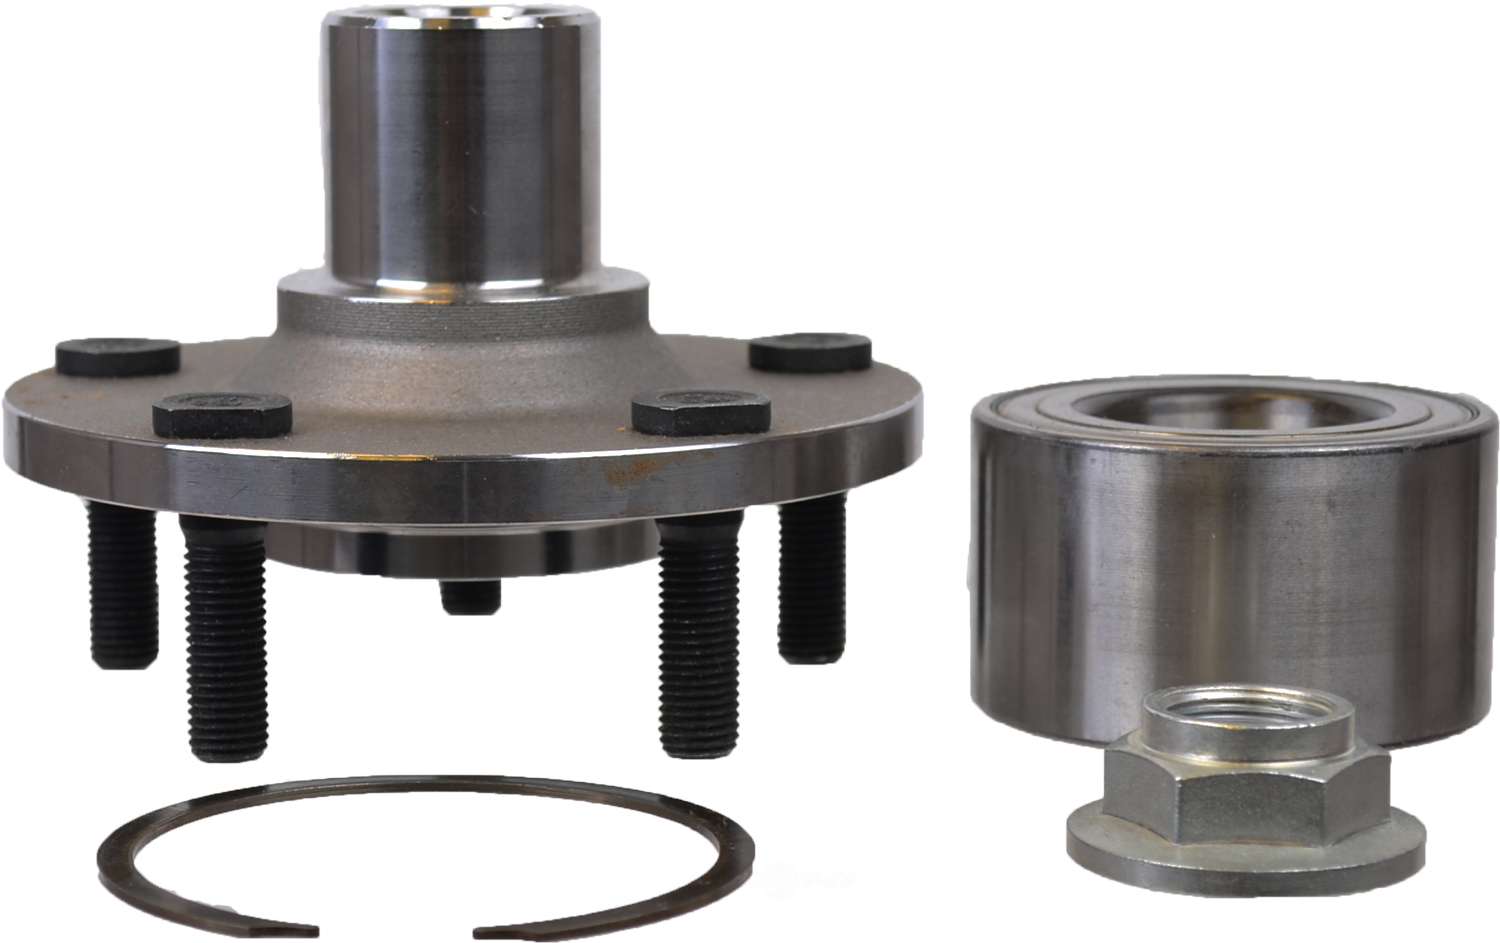 SKF (CHICAGO RAWHIDE) - Axle Bearing and Hub Assembly Repair Kit - SKF BR930286